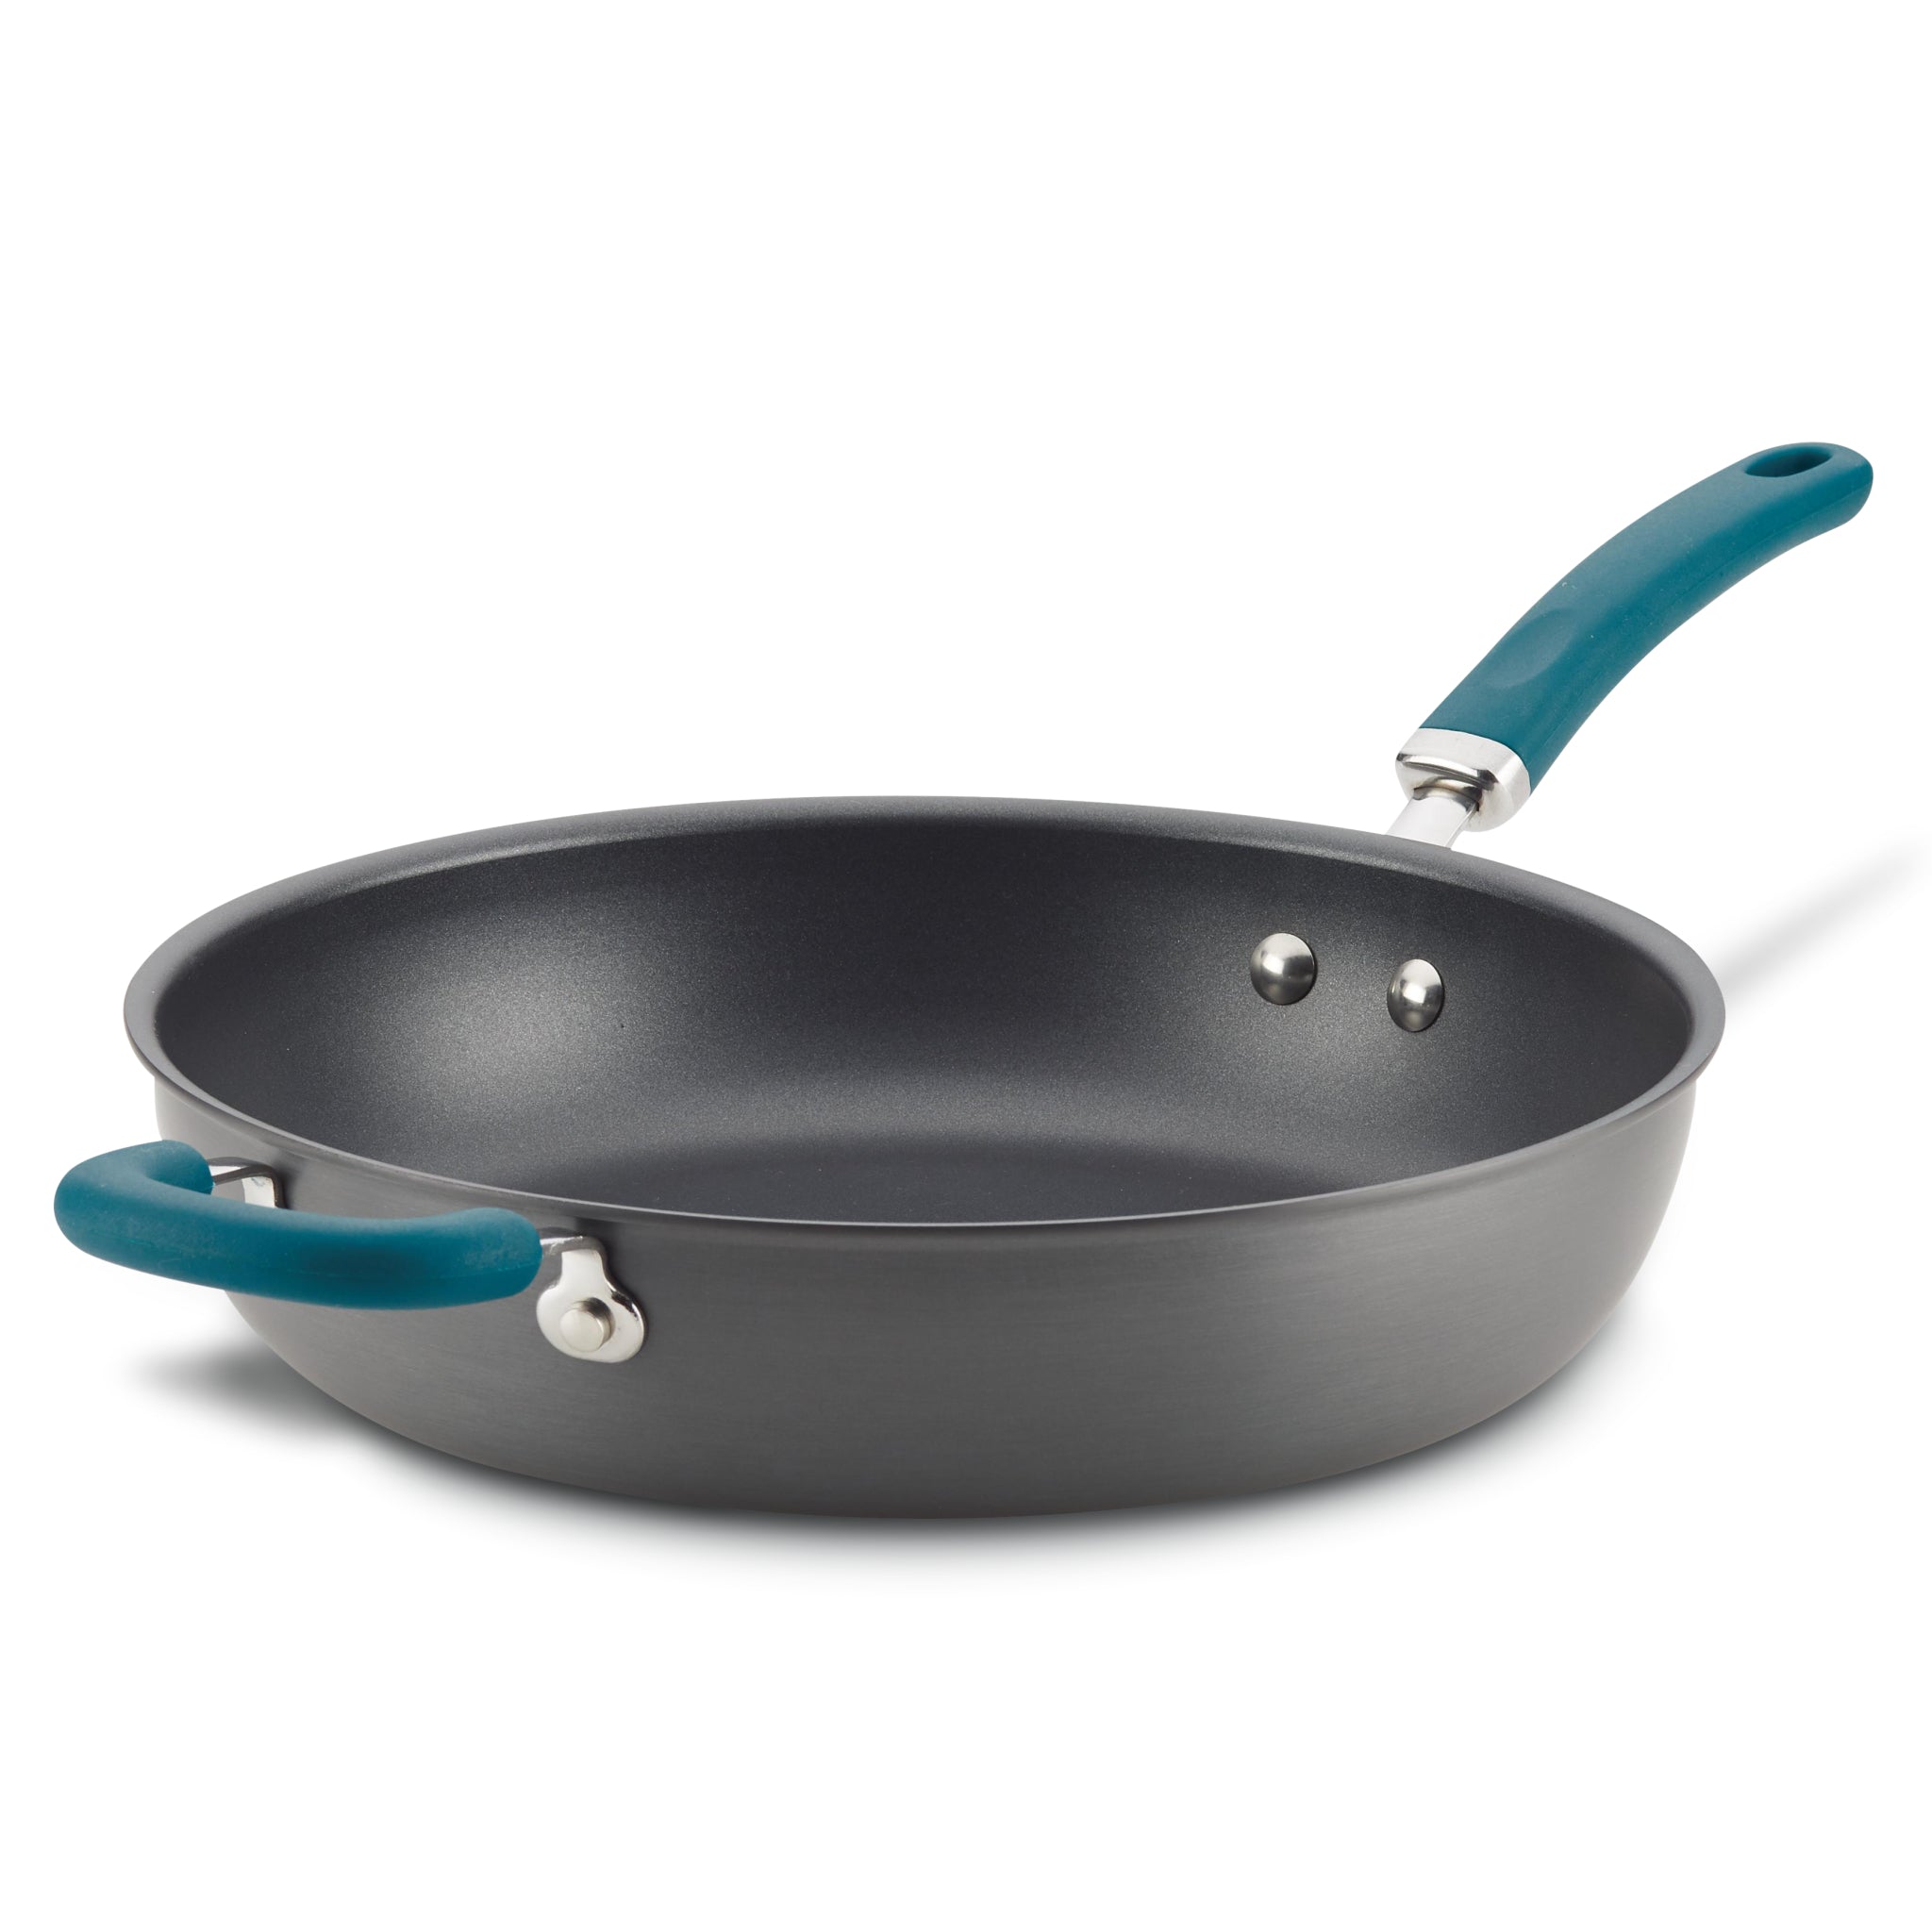 Artisan 12 in. Cast Iron Nonstick Skillet in Teal Ombre with Helper Handle